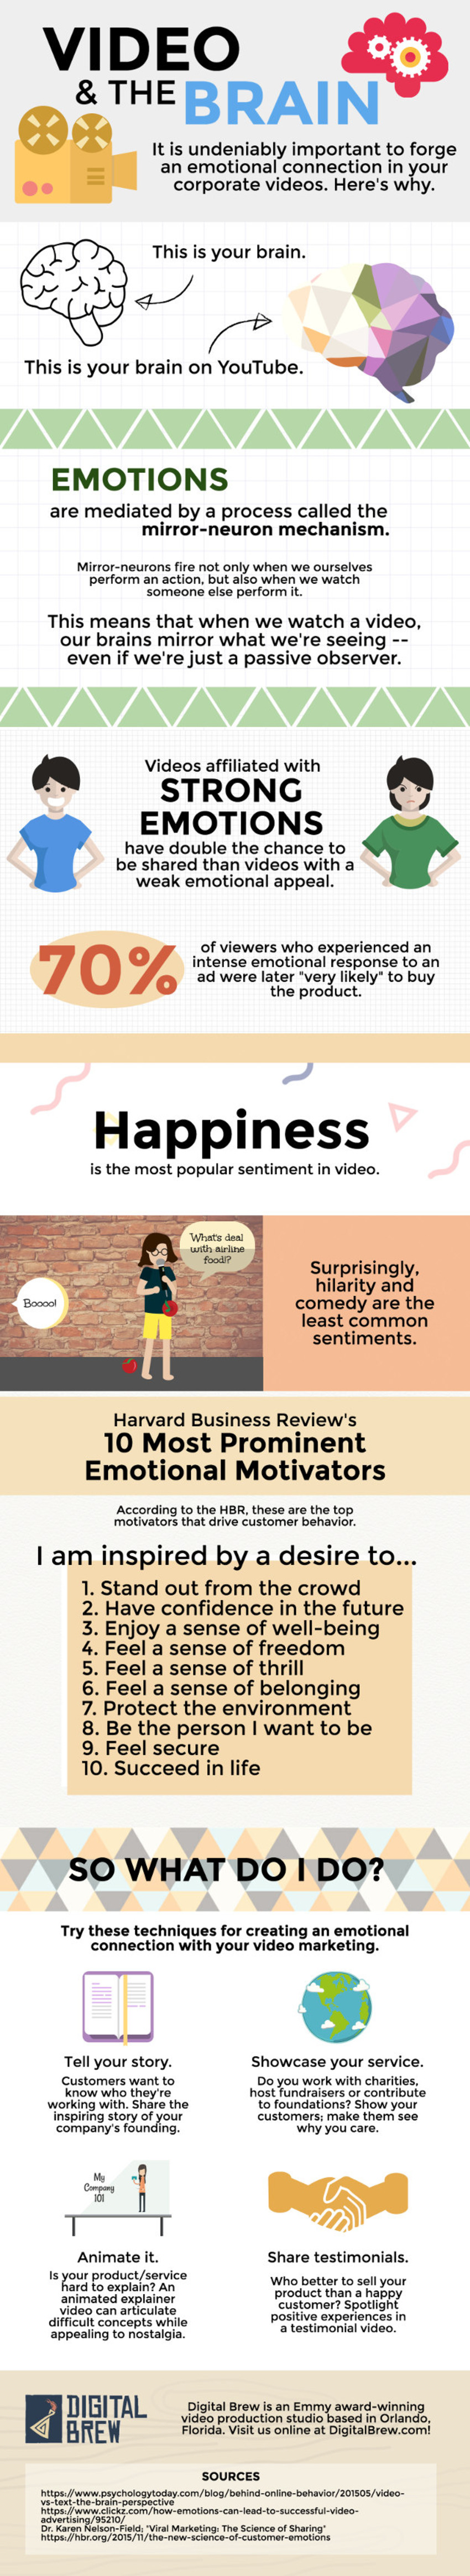 Your Brain on Video: Use Emotions to Tell Your Brand Story [Infographic] - MarketingProfs | The MarTech Digest | Scoop.it